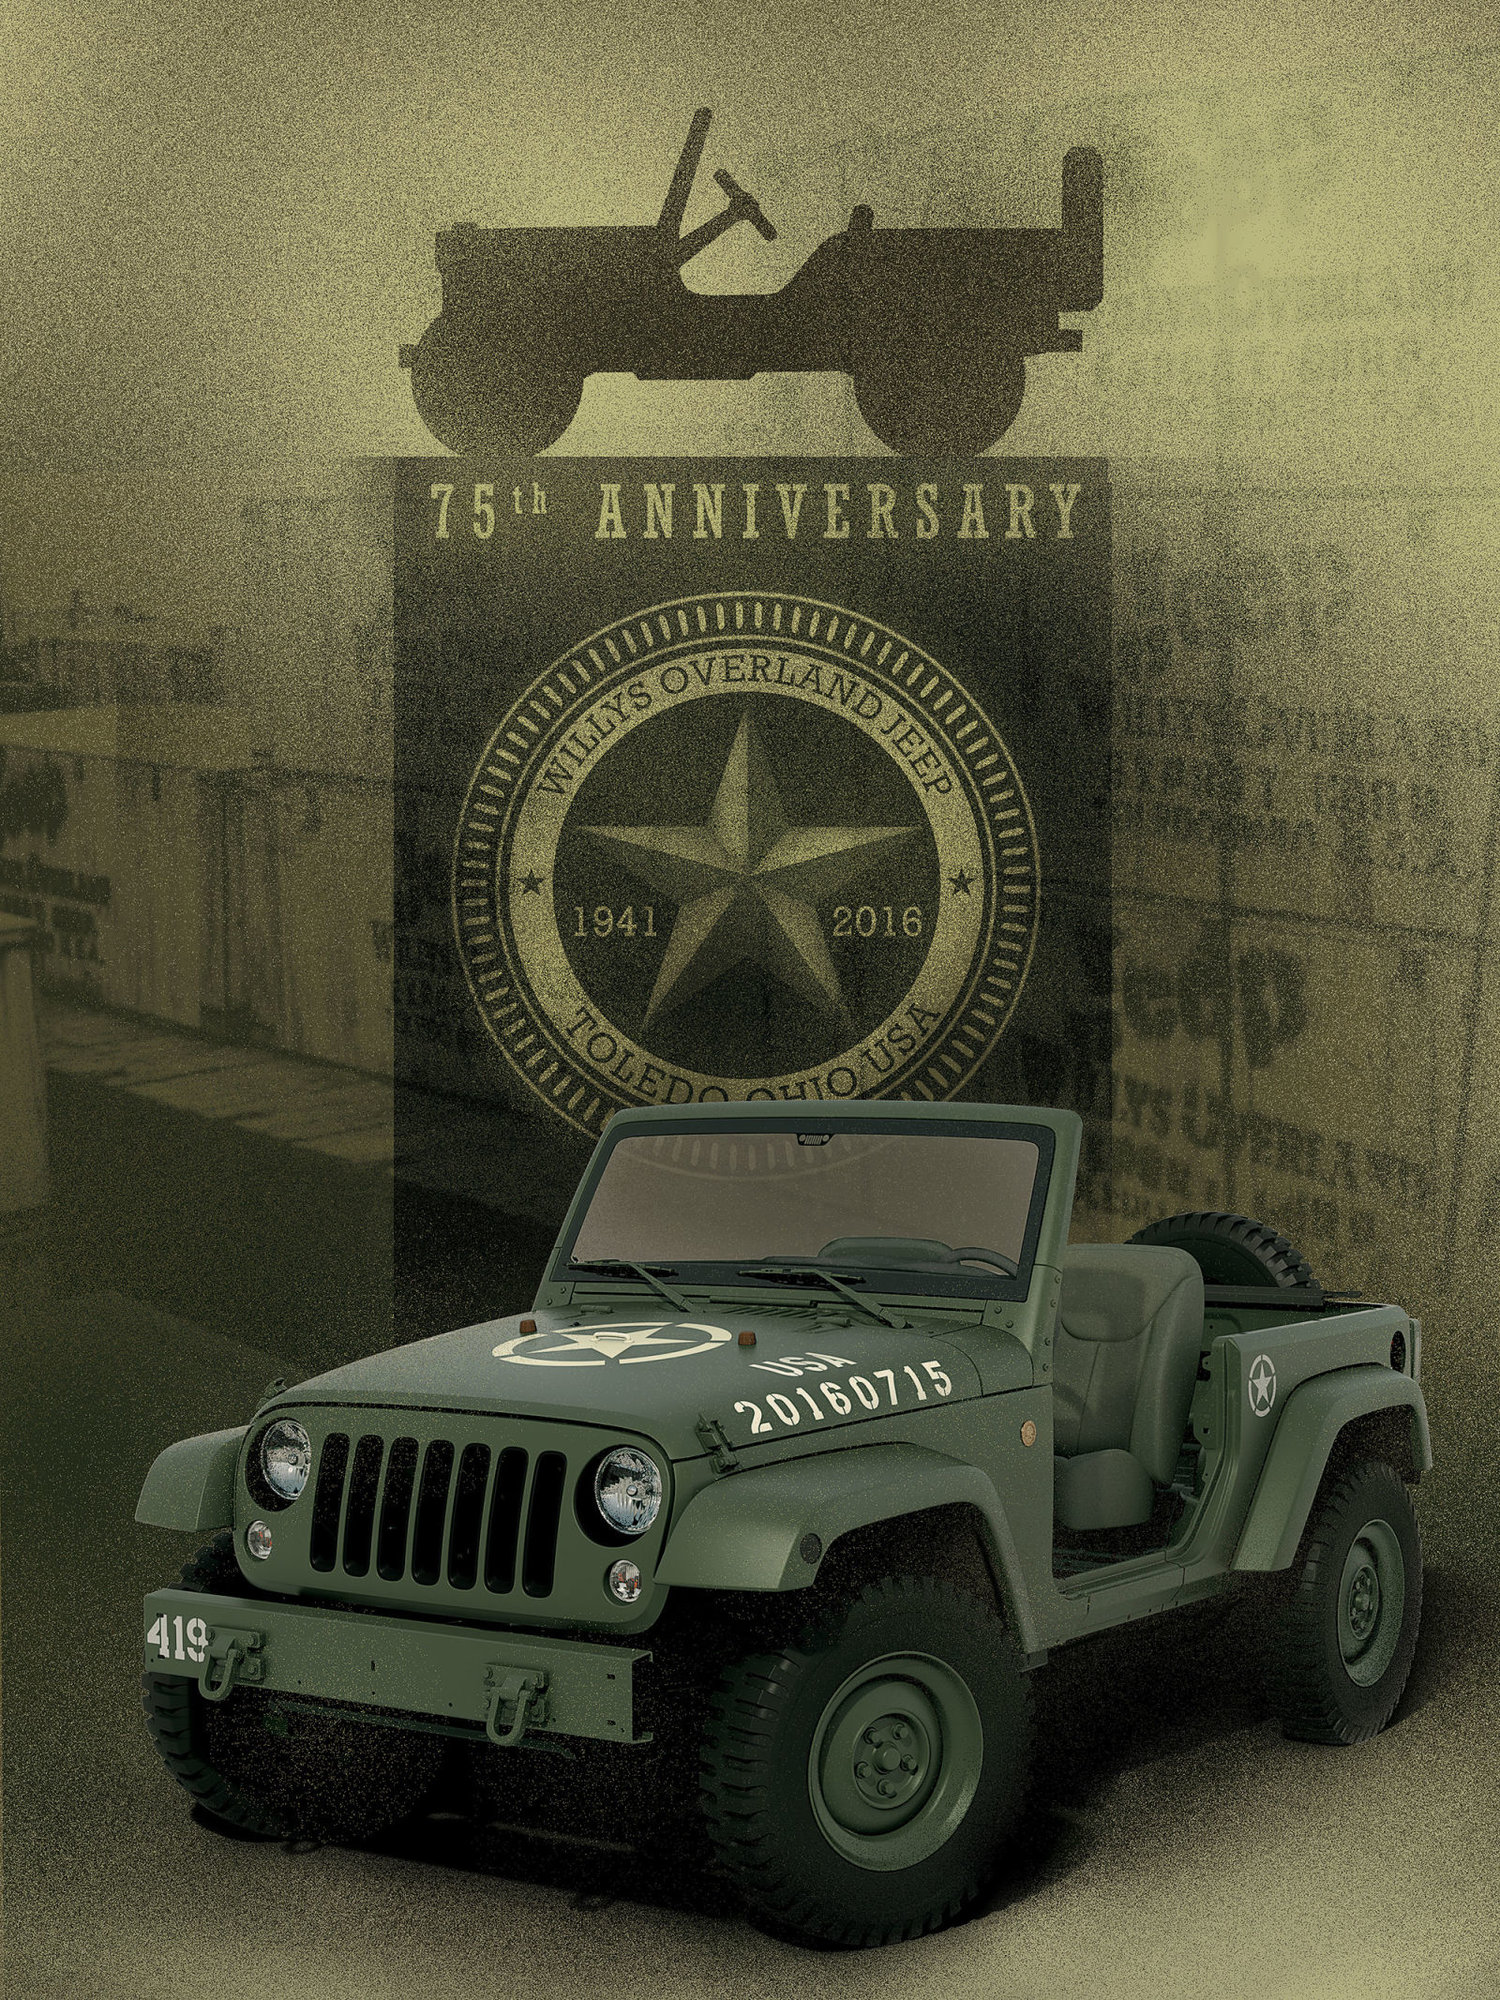 Jeep Salutes History, Fans with WWII-Themed Concept on 75th Anniversary |  Quadratec